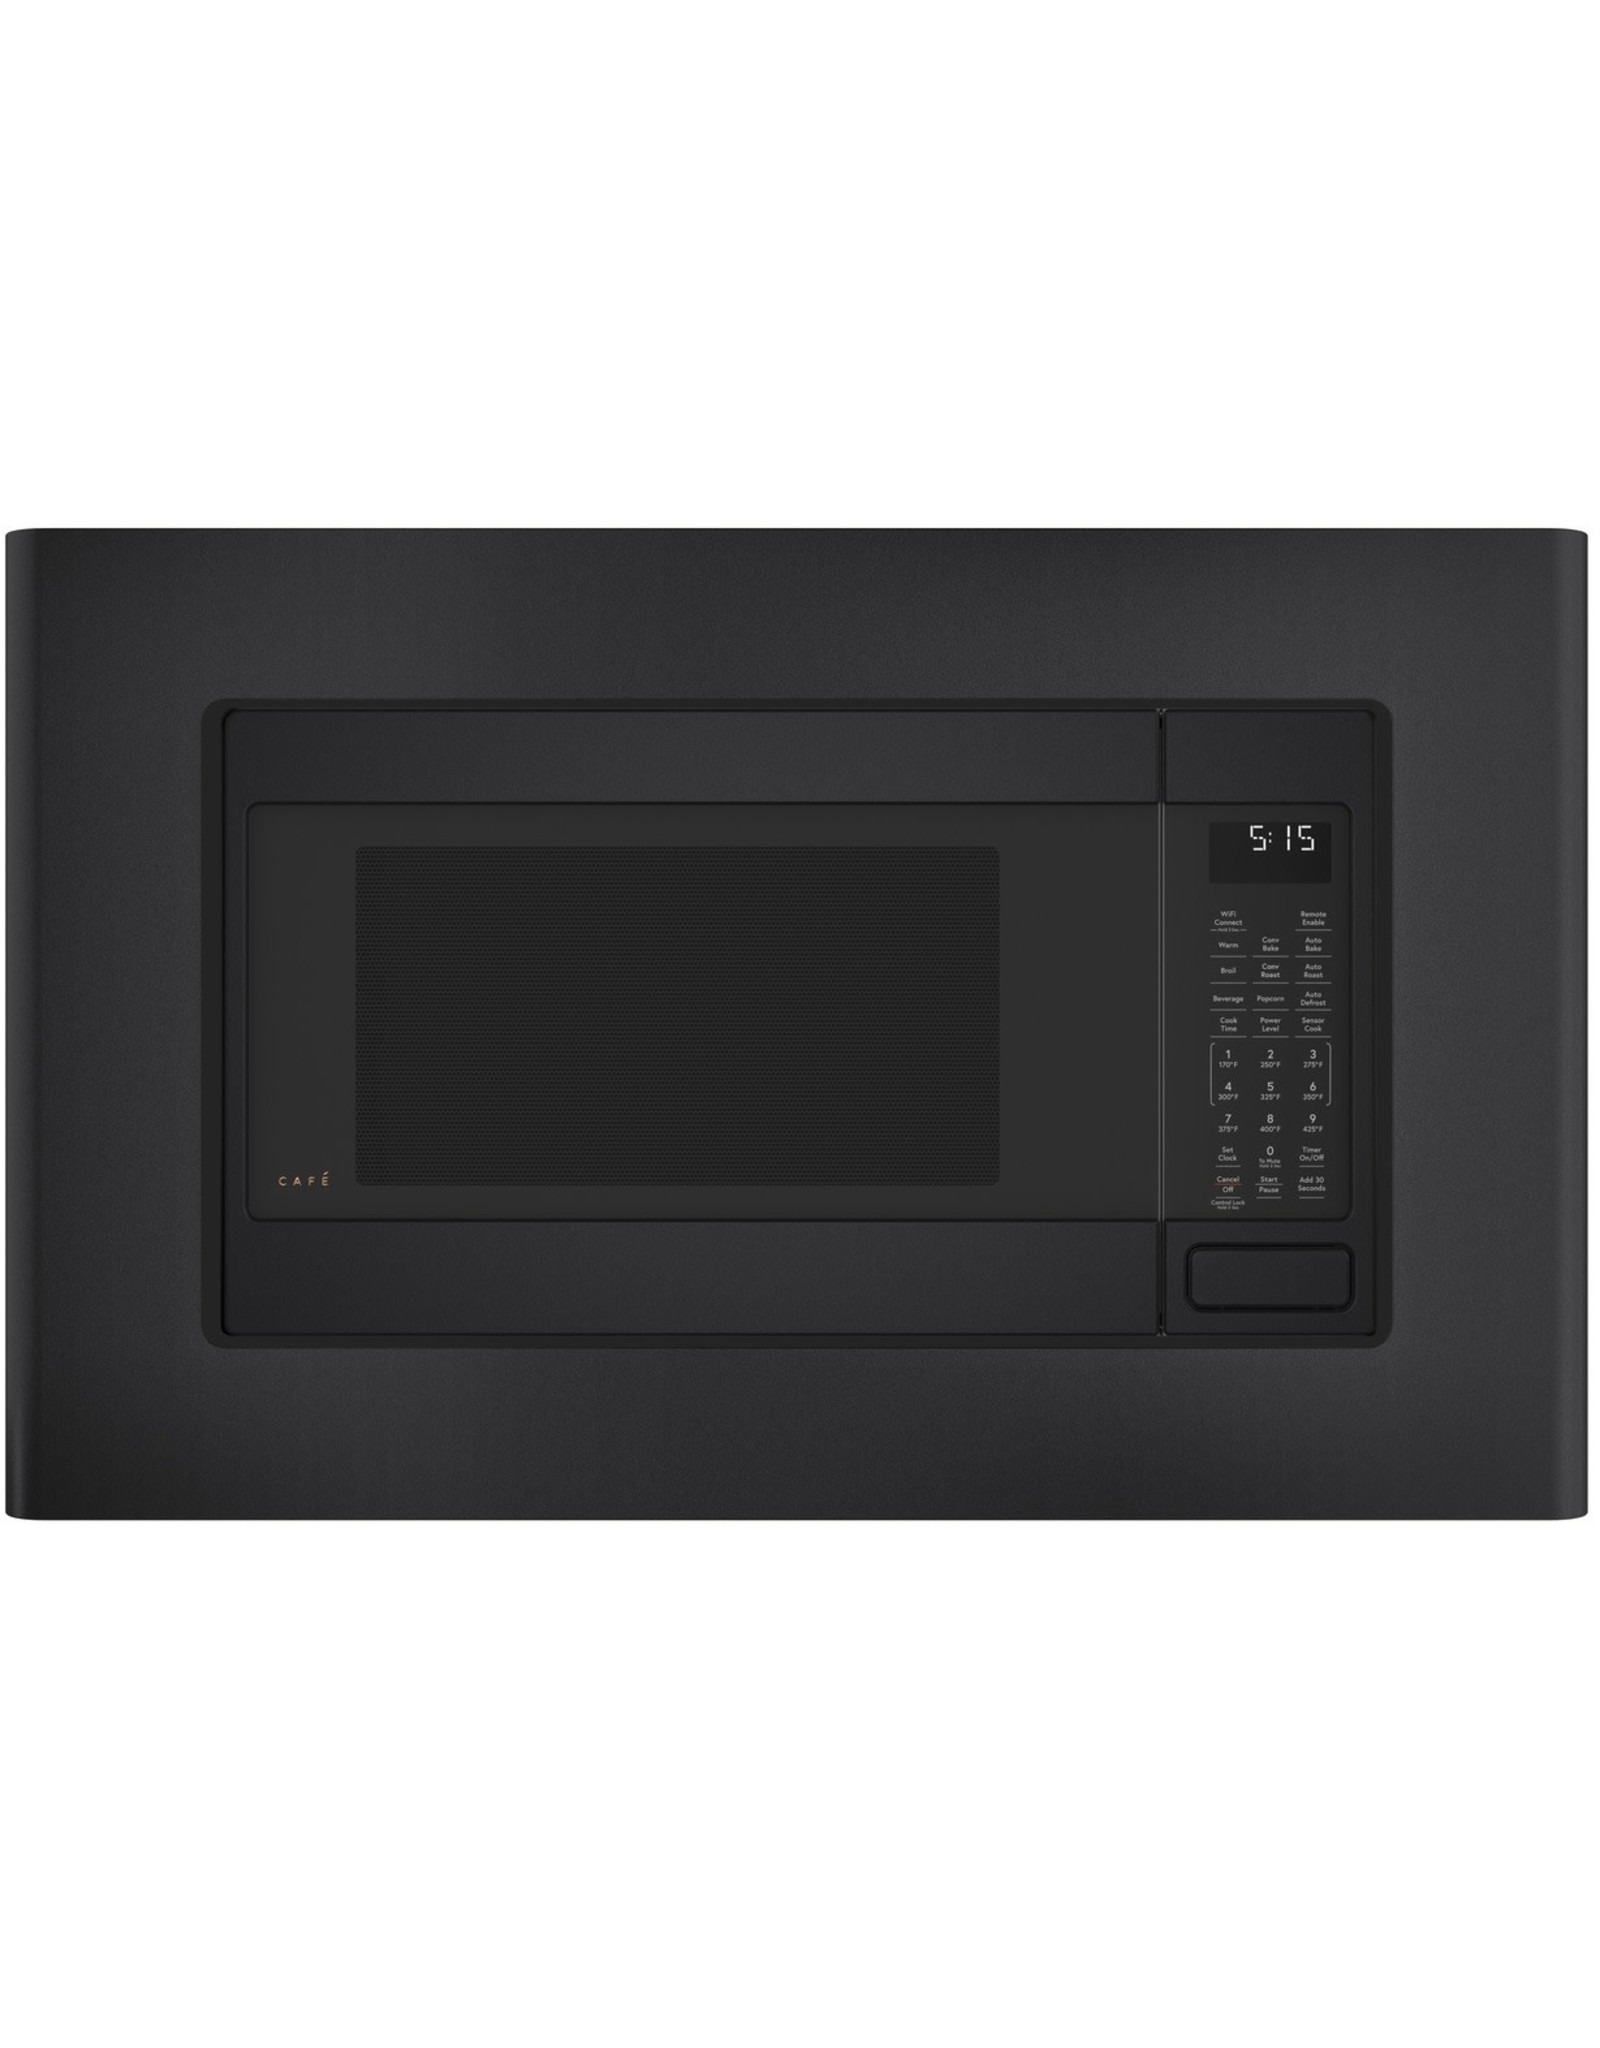 GE Cafe' CEB515P3NDS 1.5 cu. ft. Smart Countertop Convection Microwave with Sensor Cooking in Matte Black, Fingerprint Resistant